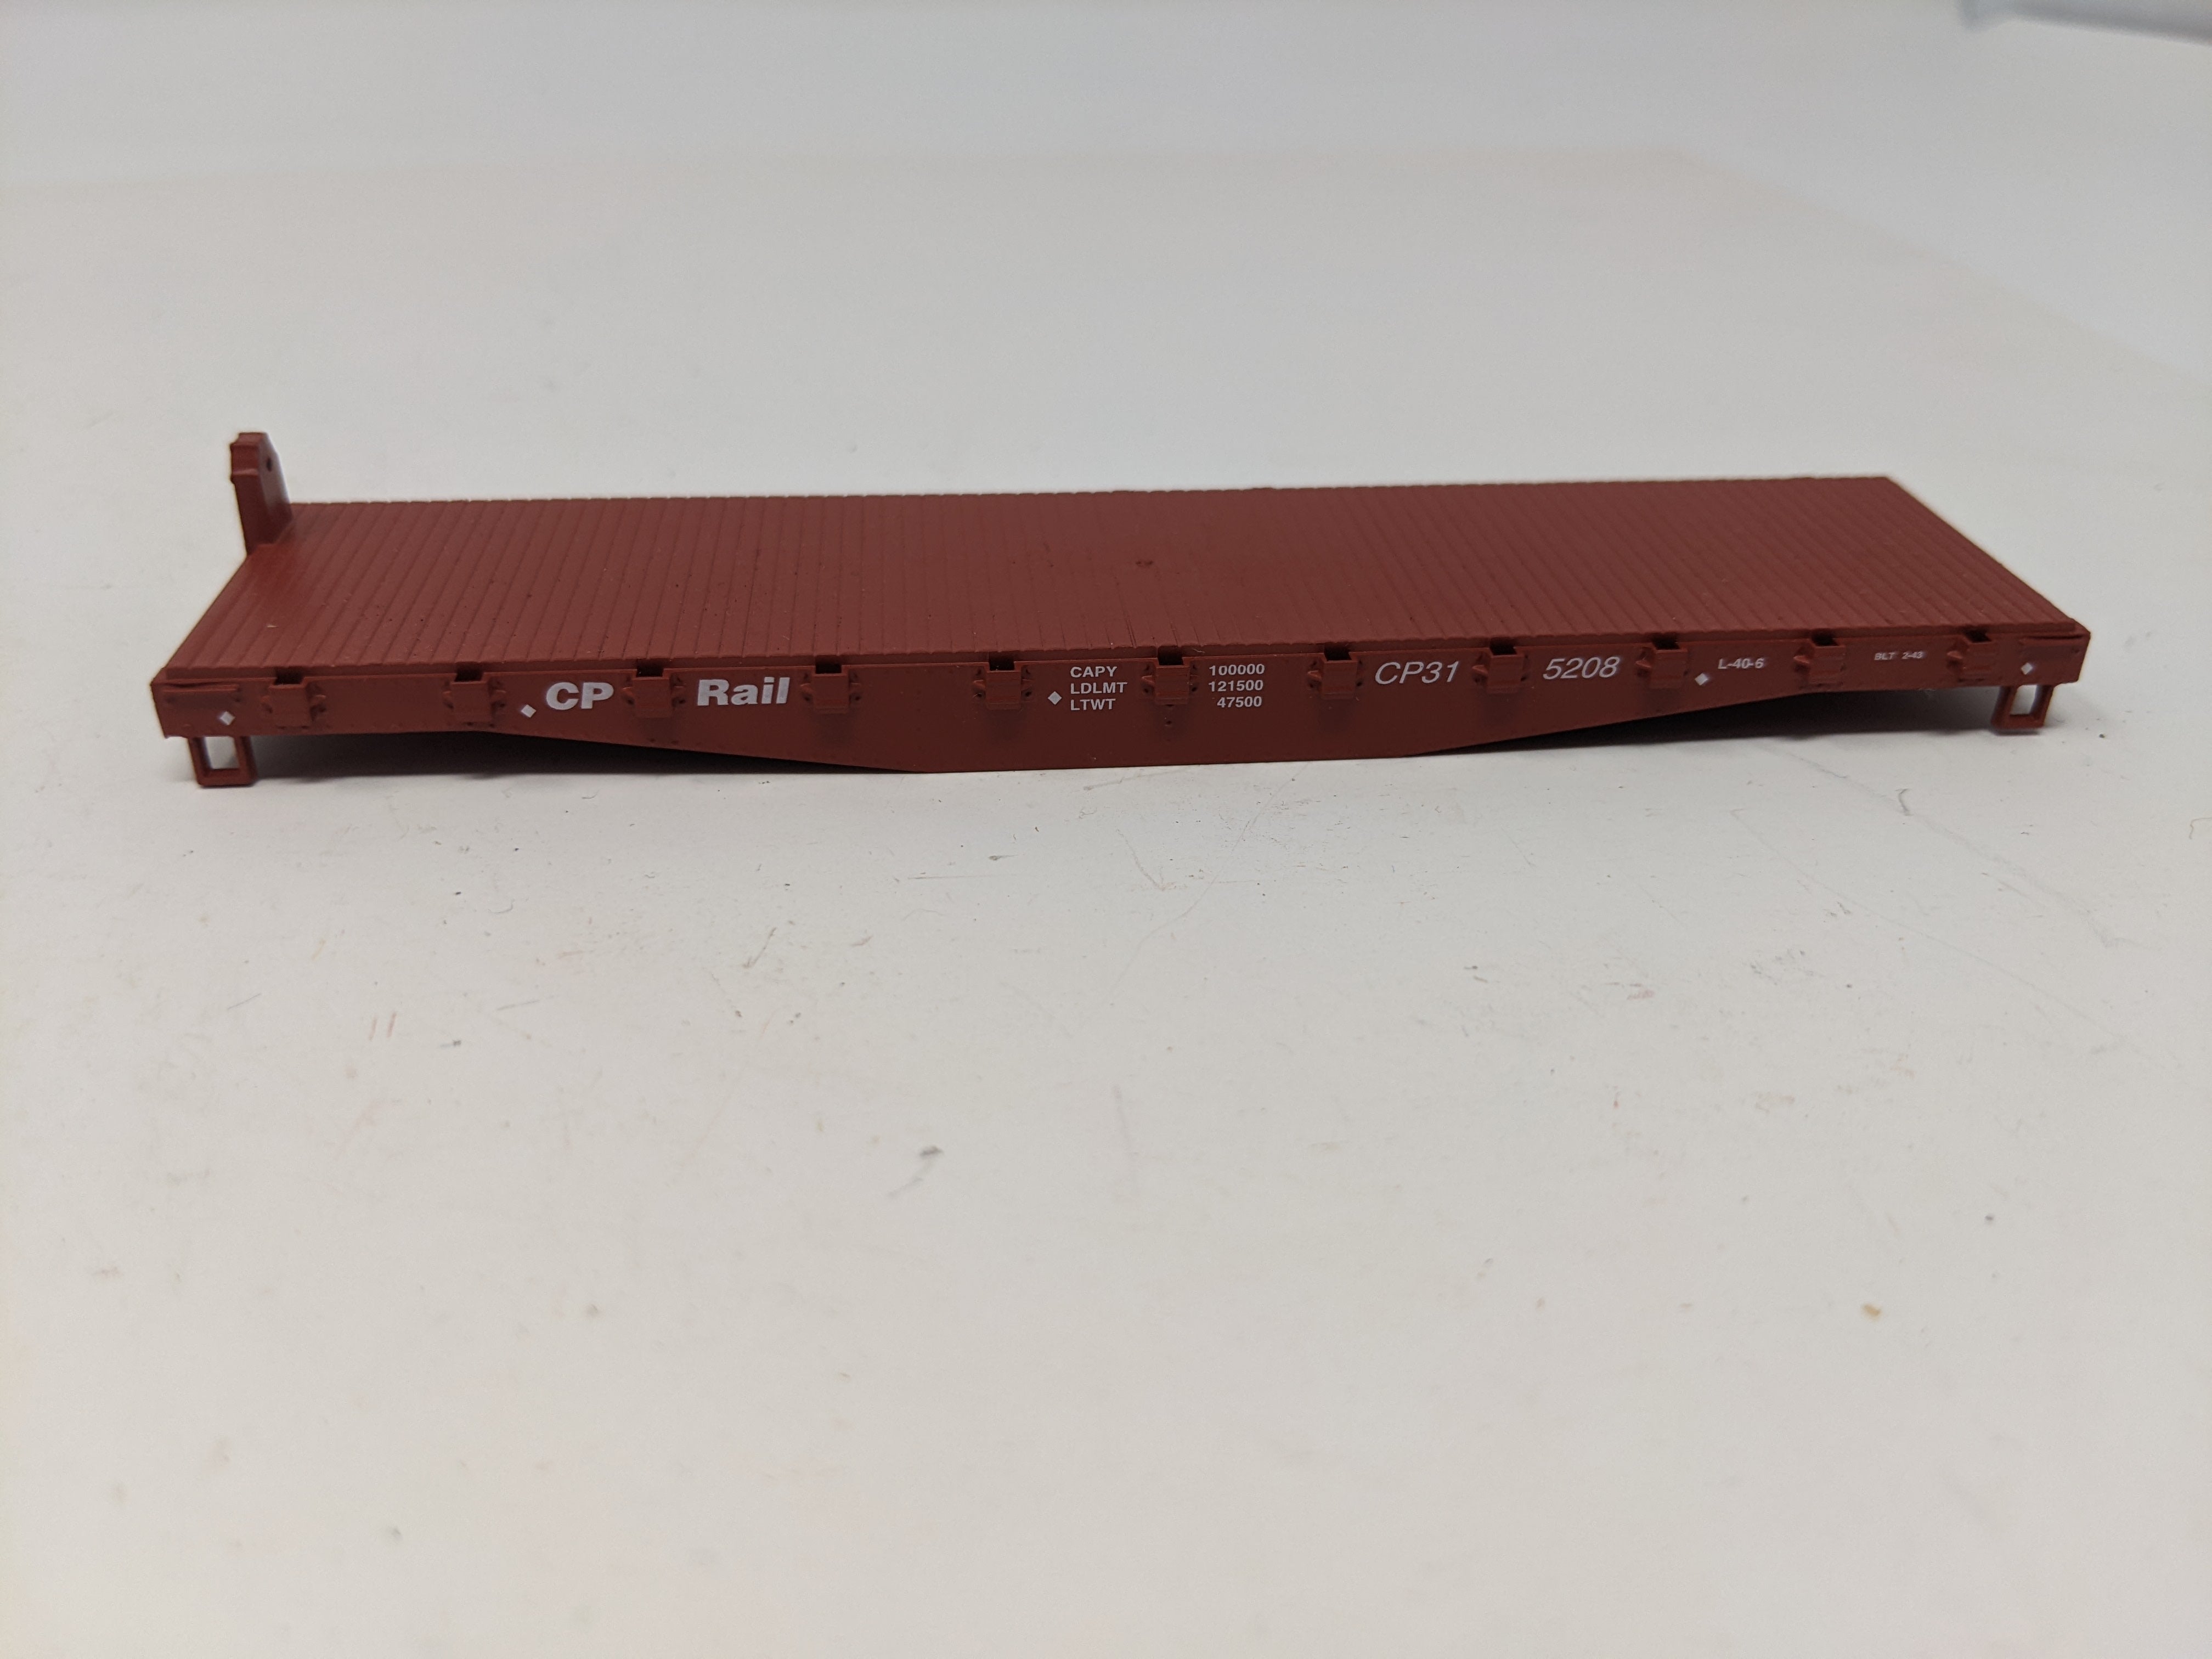 USED Athearn HO Scale, 40' Flat Car (incomplete), Canadian Pacific CP31 #5208, Read Description